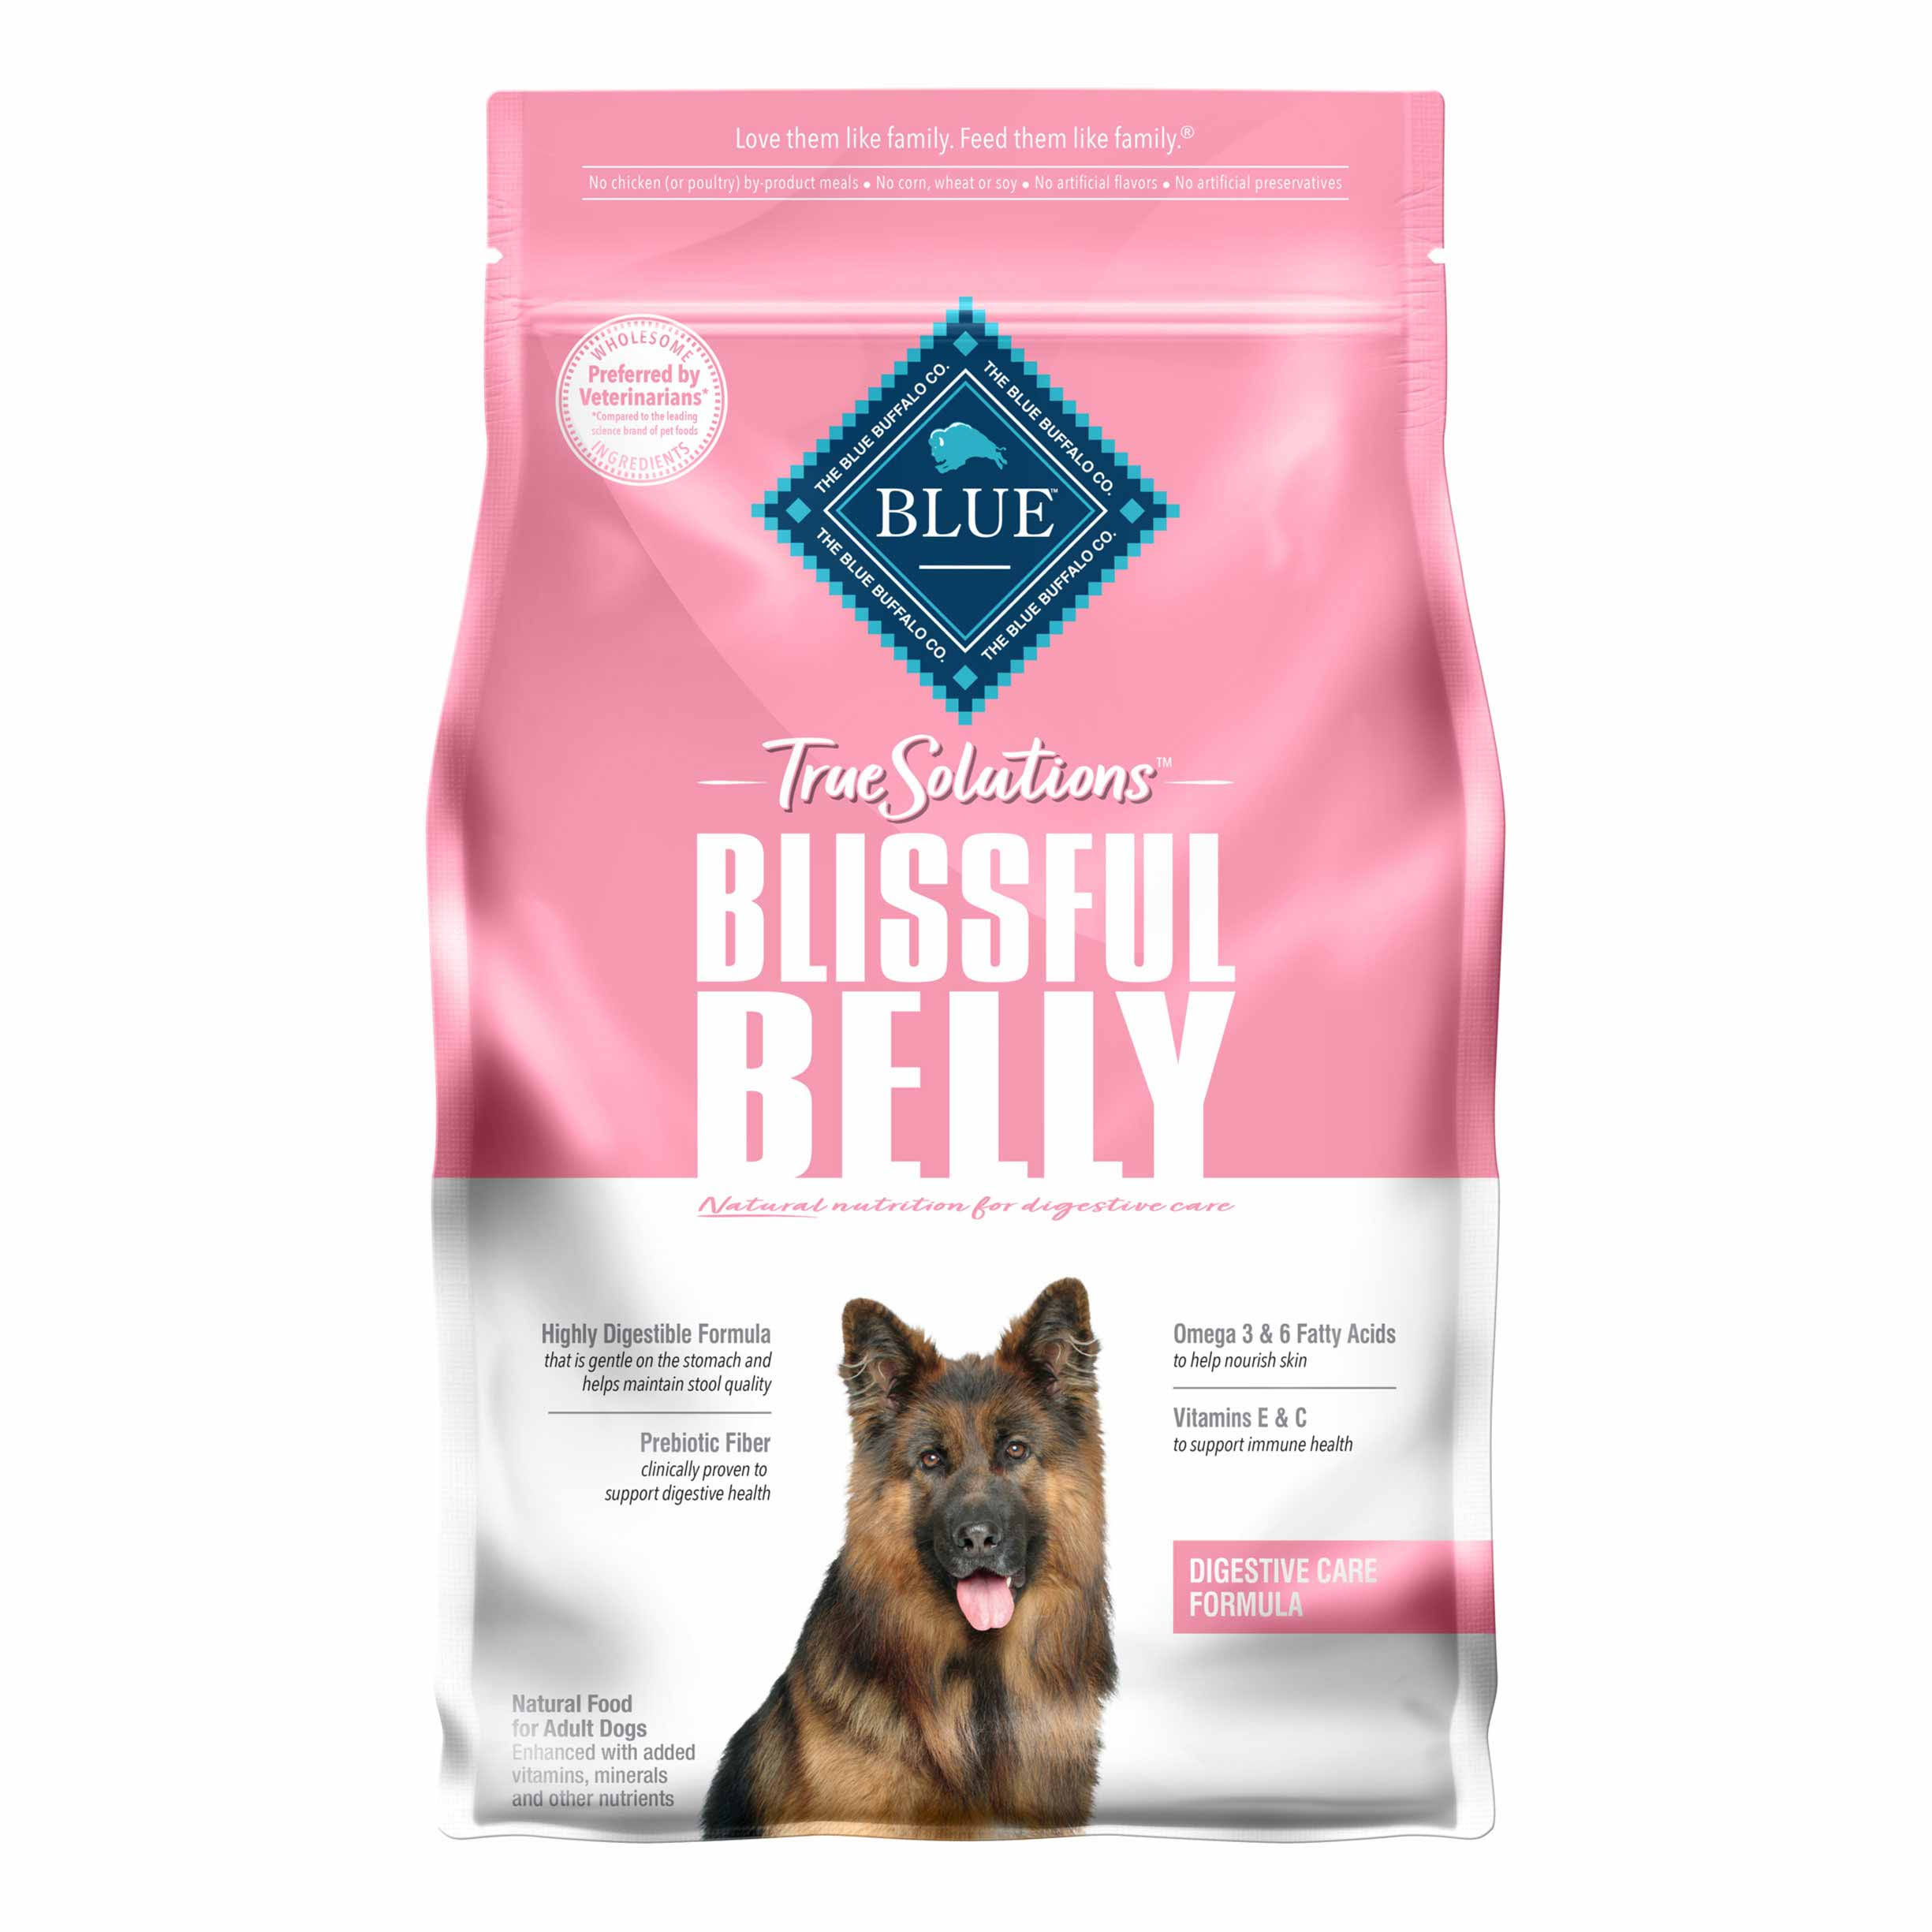 Blue Buffalo True Solutions Blissful Belly Natural Digestive Care Adult Dry Dog Food, Chicken 4-lb